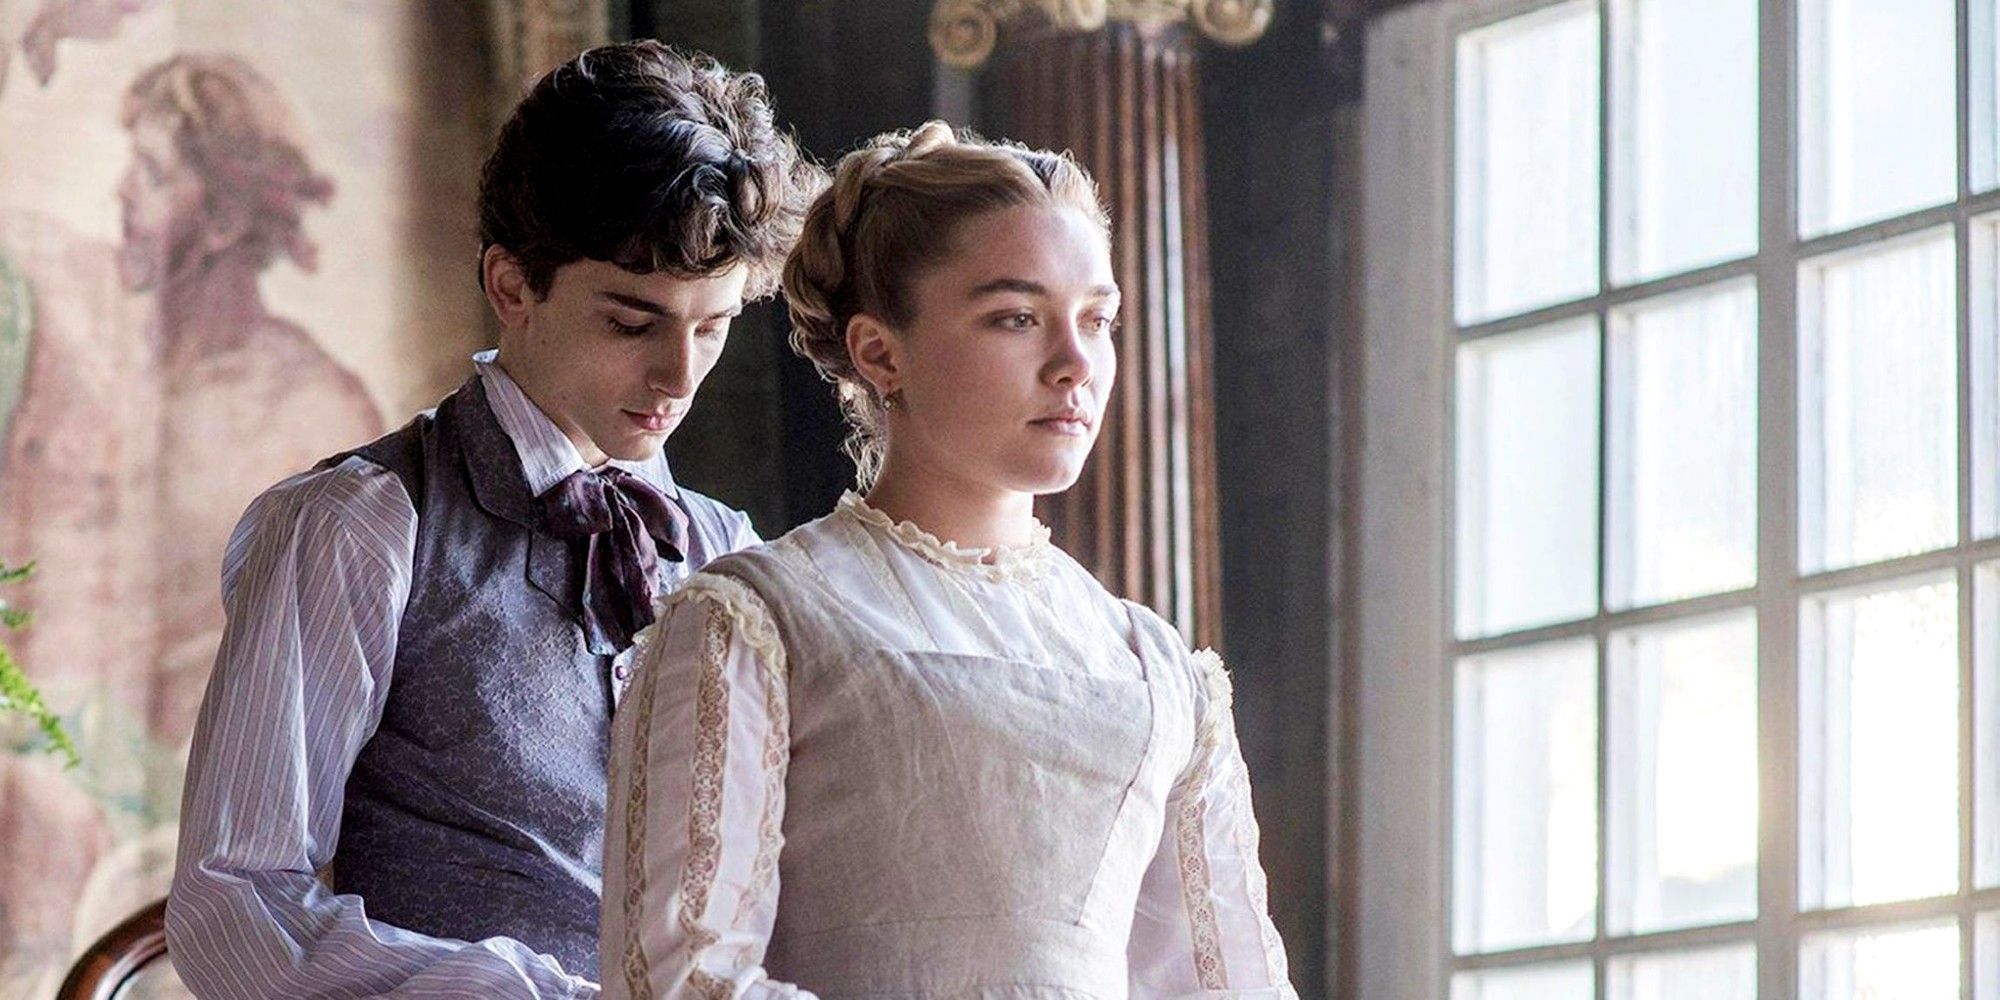 florence pugh as amy march in little women (2019)